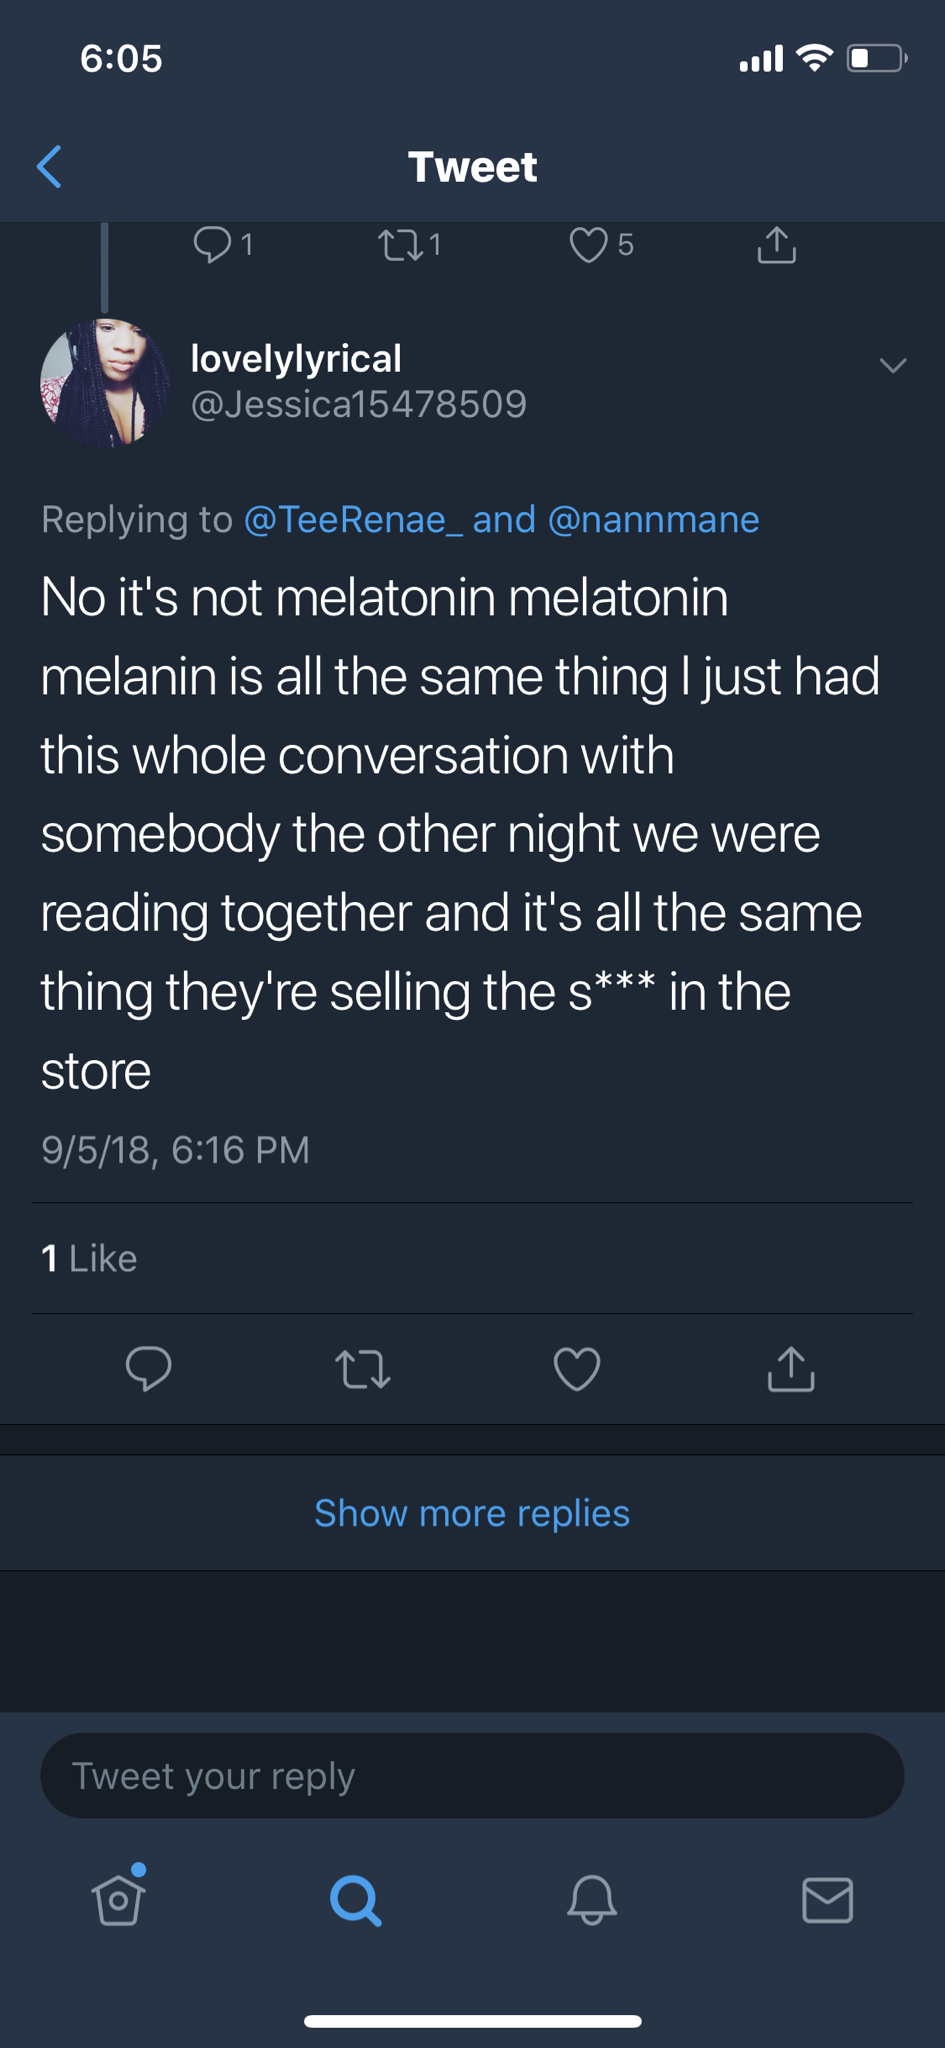 tweet - screenshot - Tweet lovelylyrical Jessica15478509 eTeeRenae_and No it's not melatonin melatonin melanin is all the same thing I just had this whole conversation with somebody the other night we were reading together and it's all the same thing they